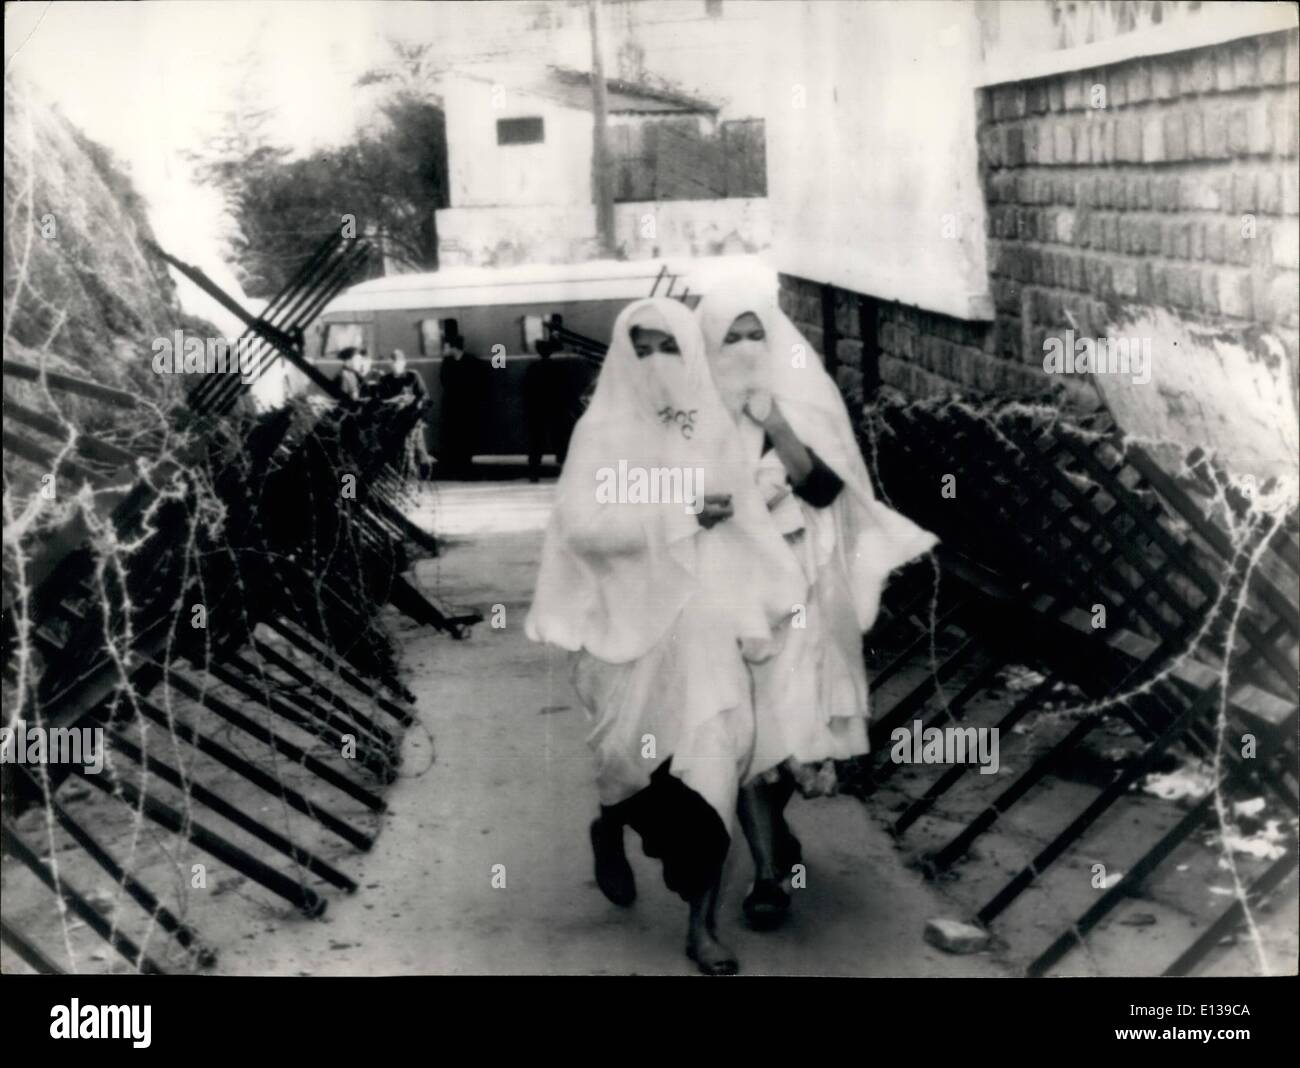 Feb. 29, 2012 - Referendum: Voting In Algiers. Photo Shows: Muslim women passing through barbed wires on their way to the polling station in Algiers this morning. Stock Photo